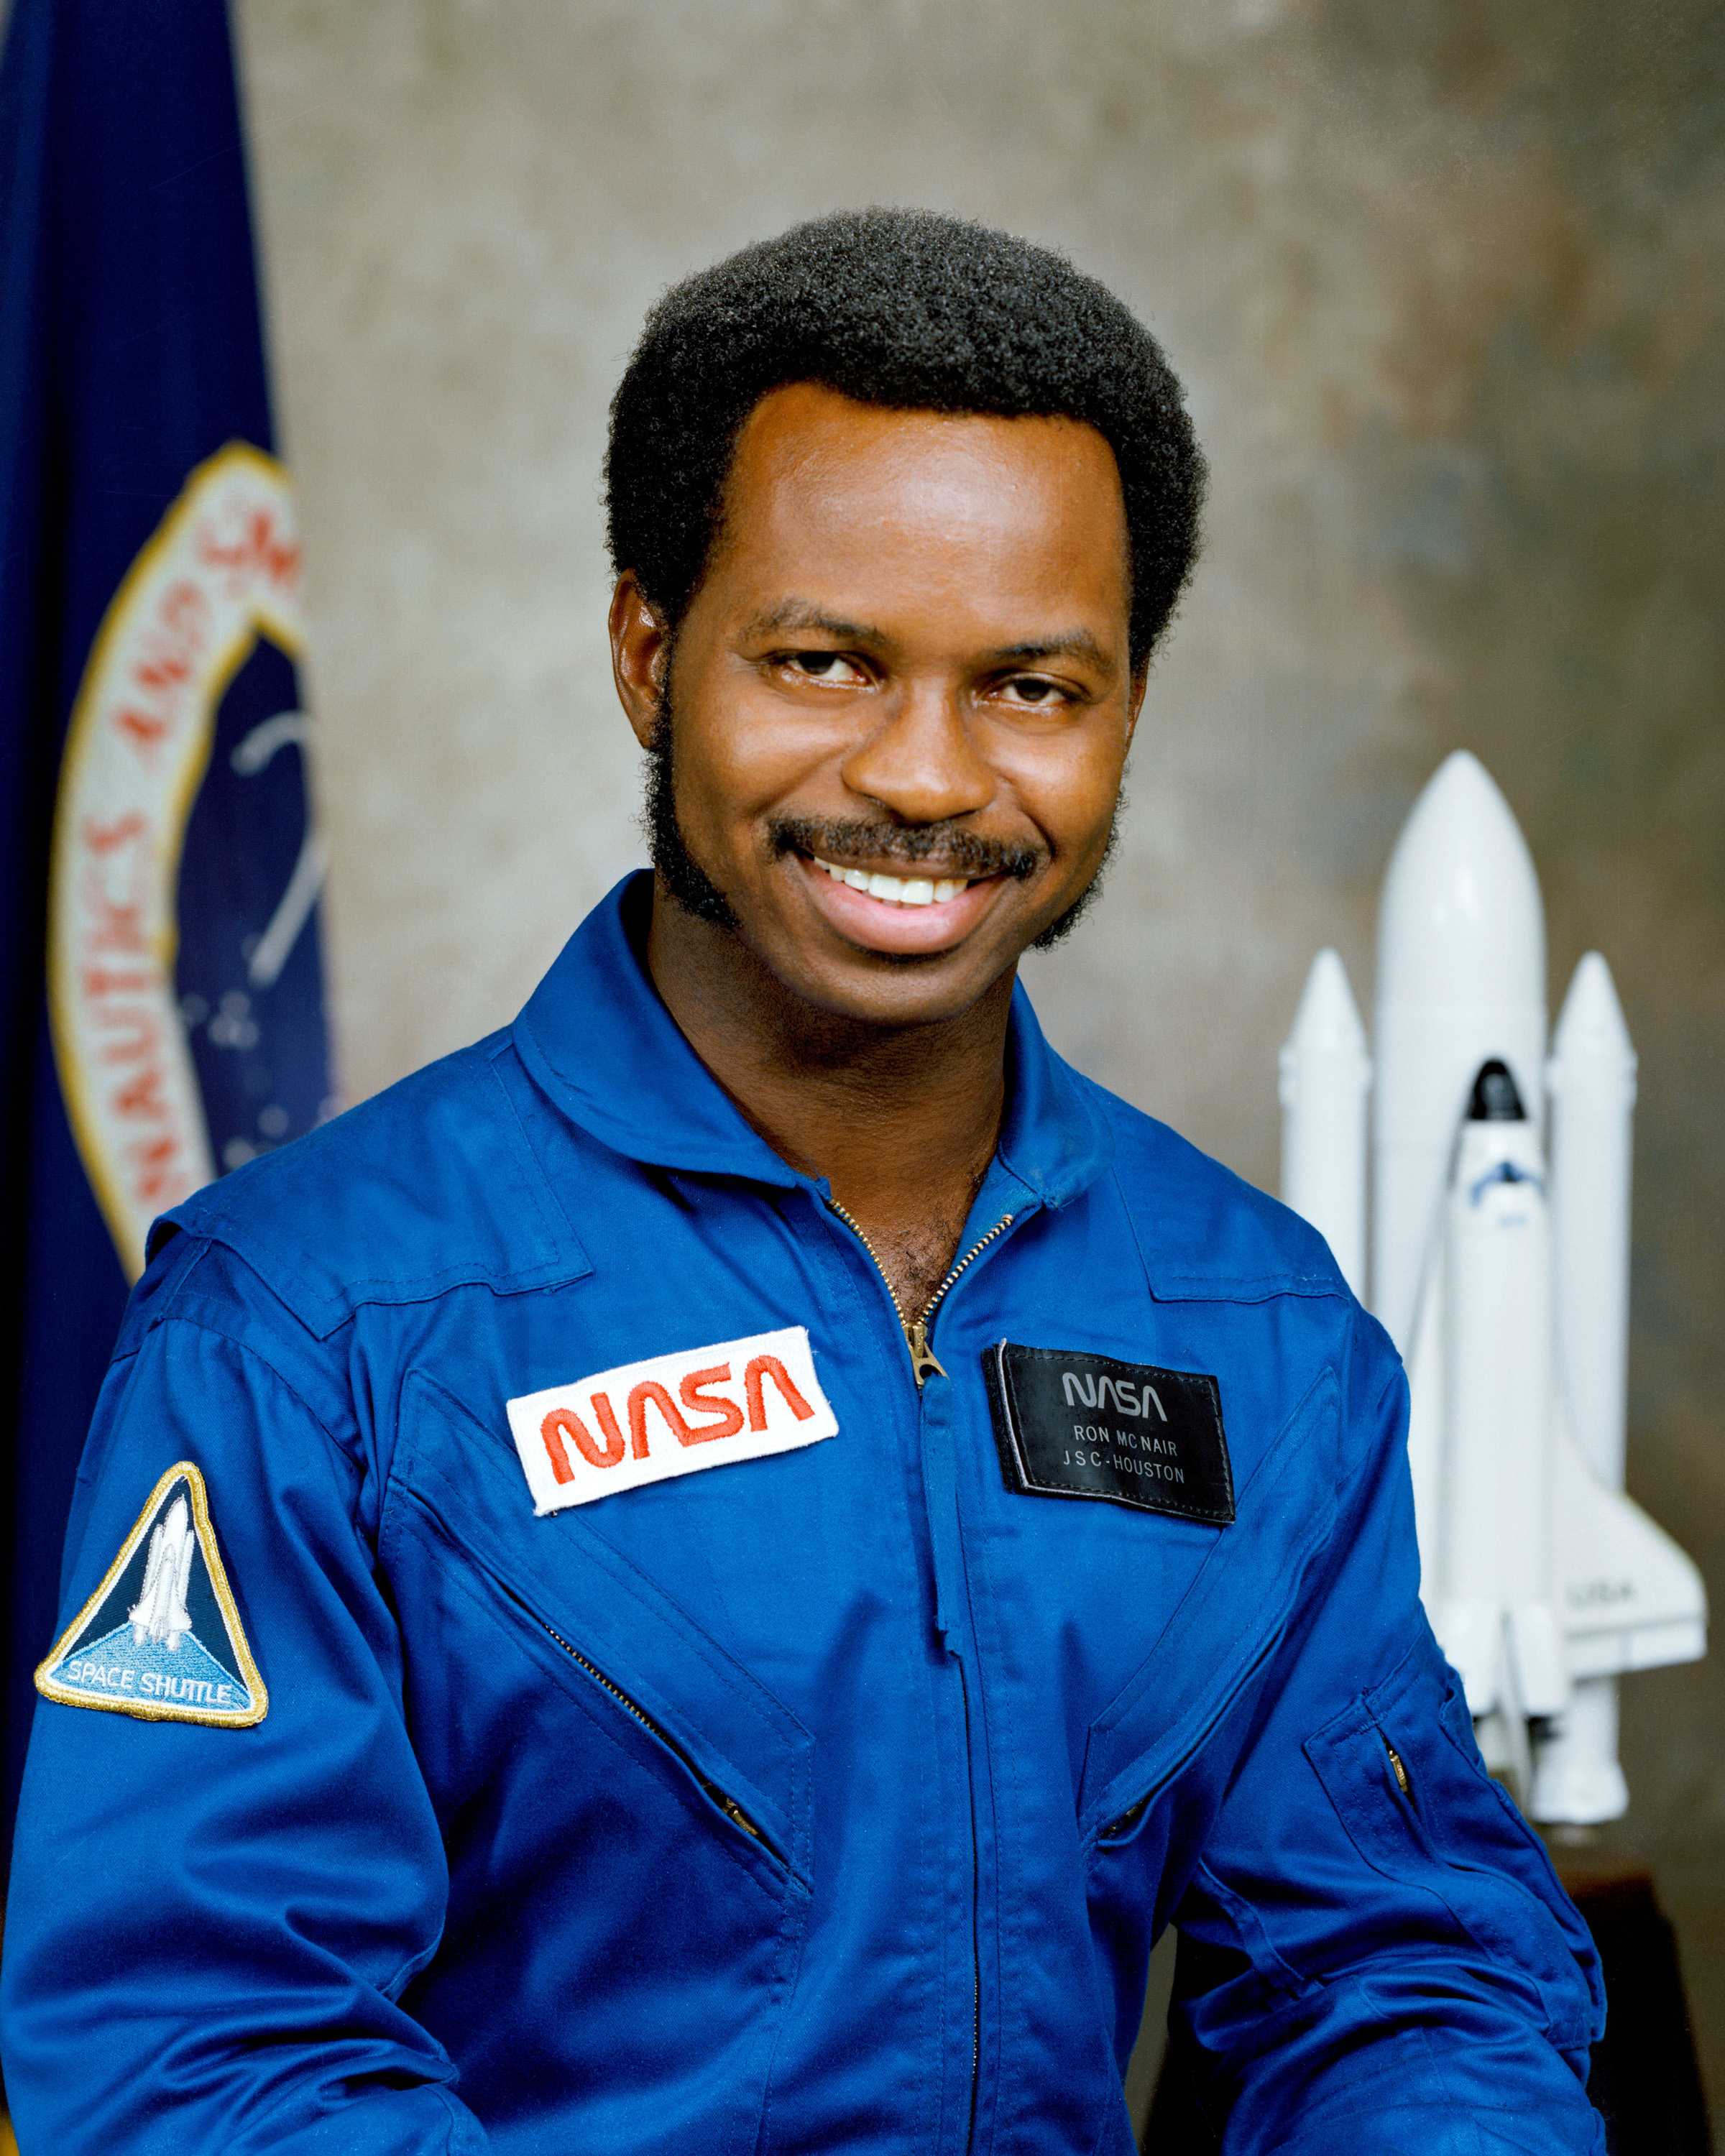 Ronald McNair is wearing a blue NASA uniform and looking directly at the camera with a confident expression.